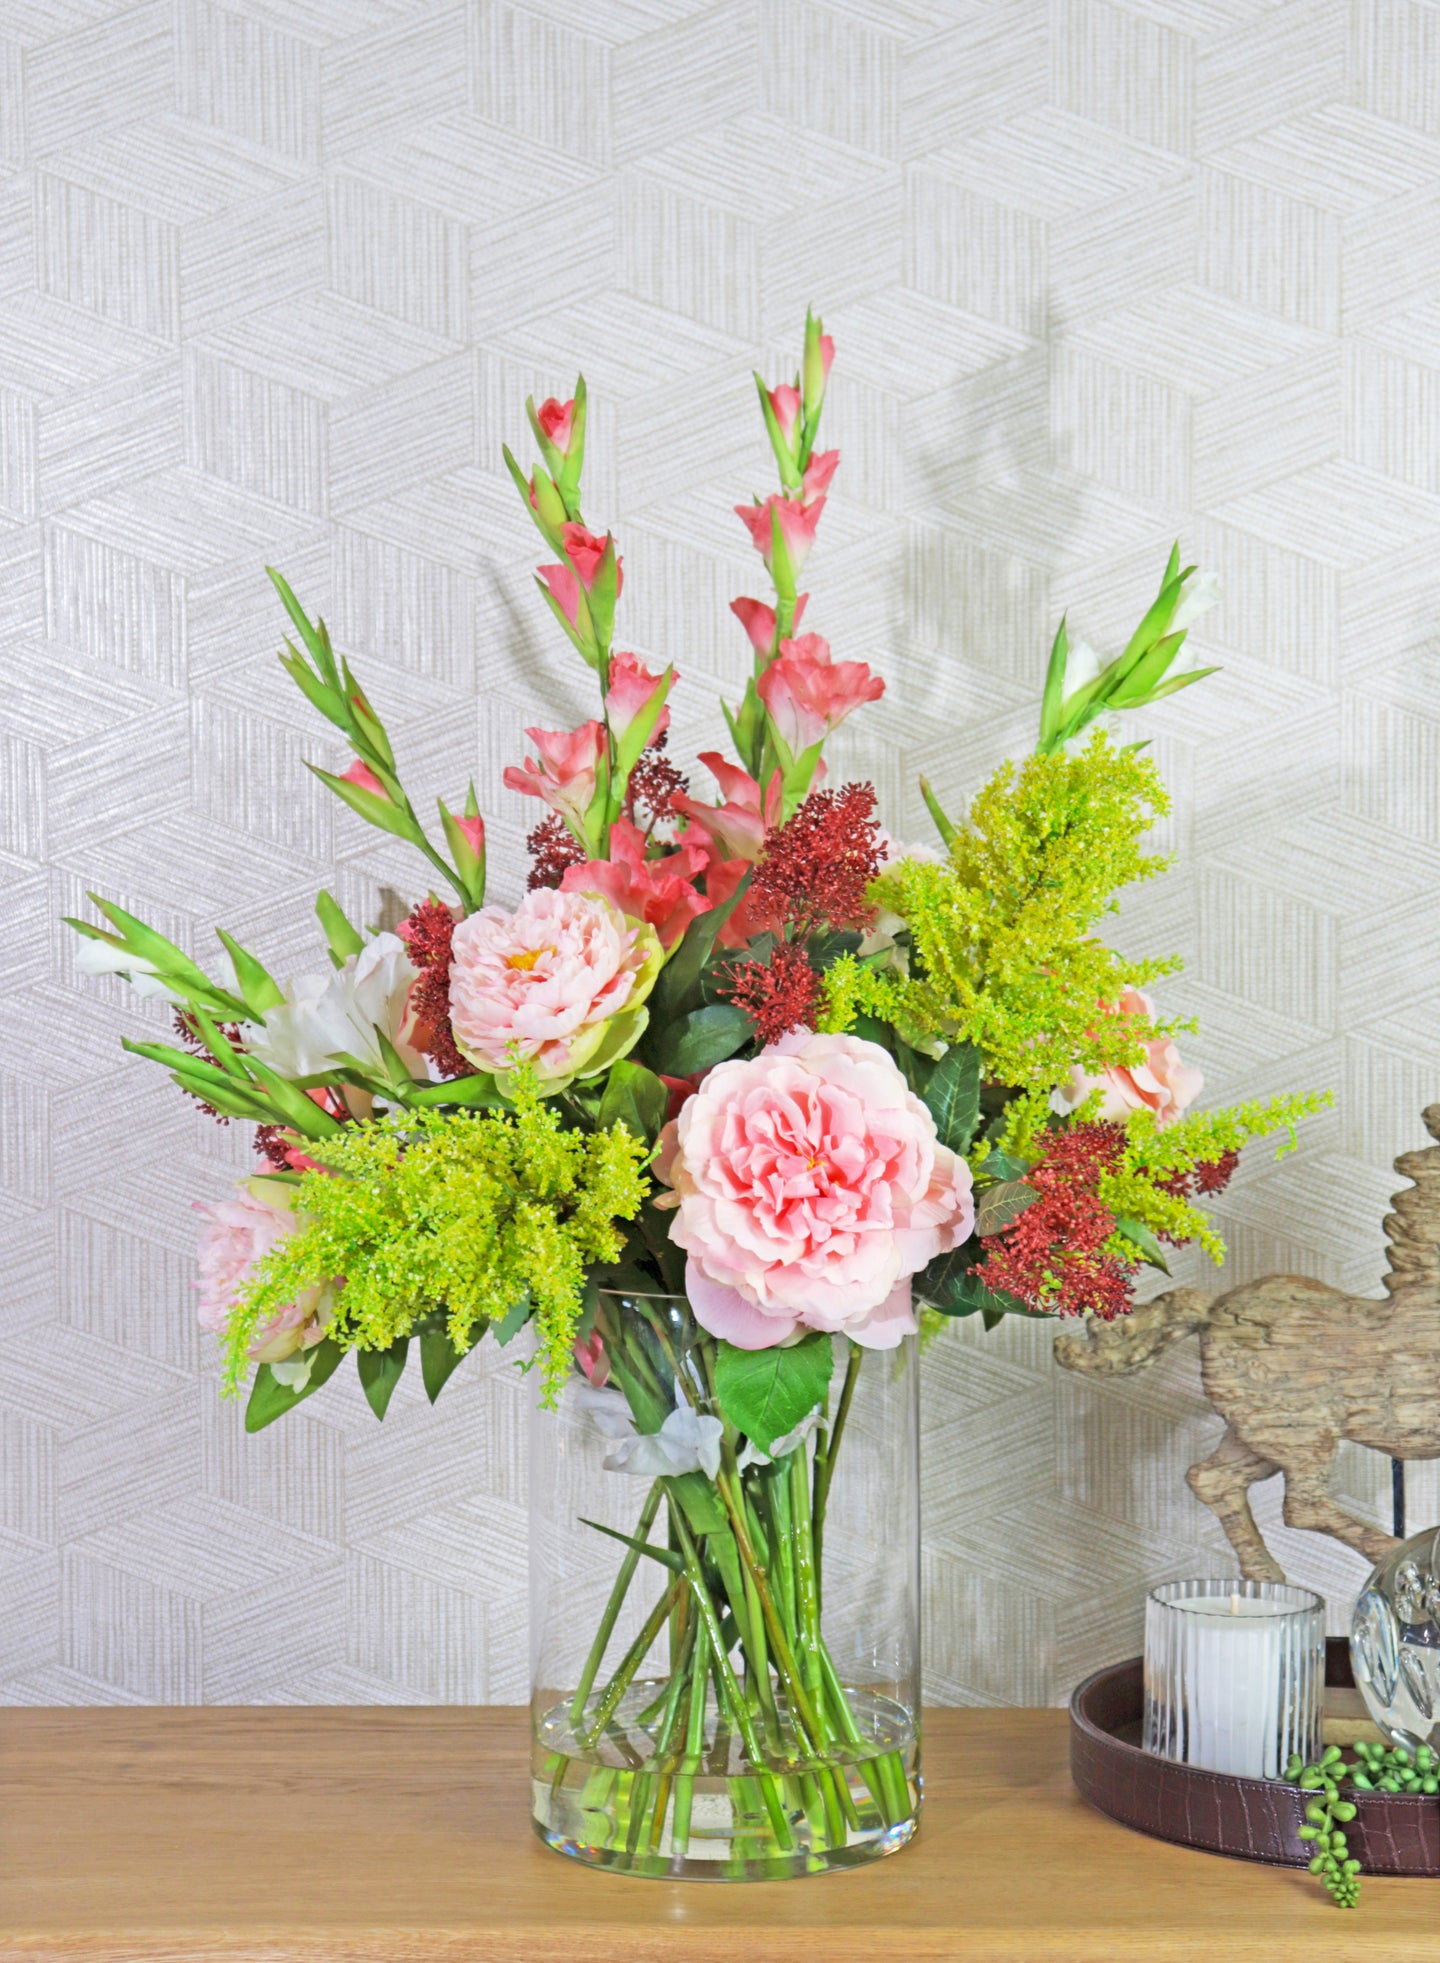 Silk Prestige offer high quality, luxurious, sustainable and cost effective silk flower arrangements.